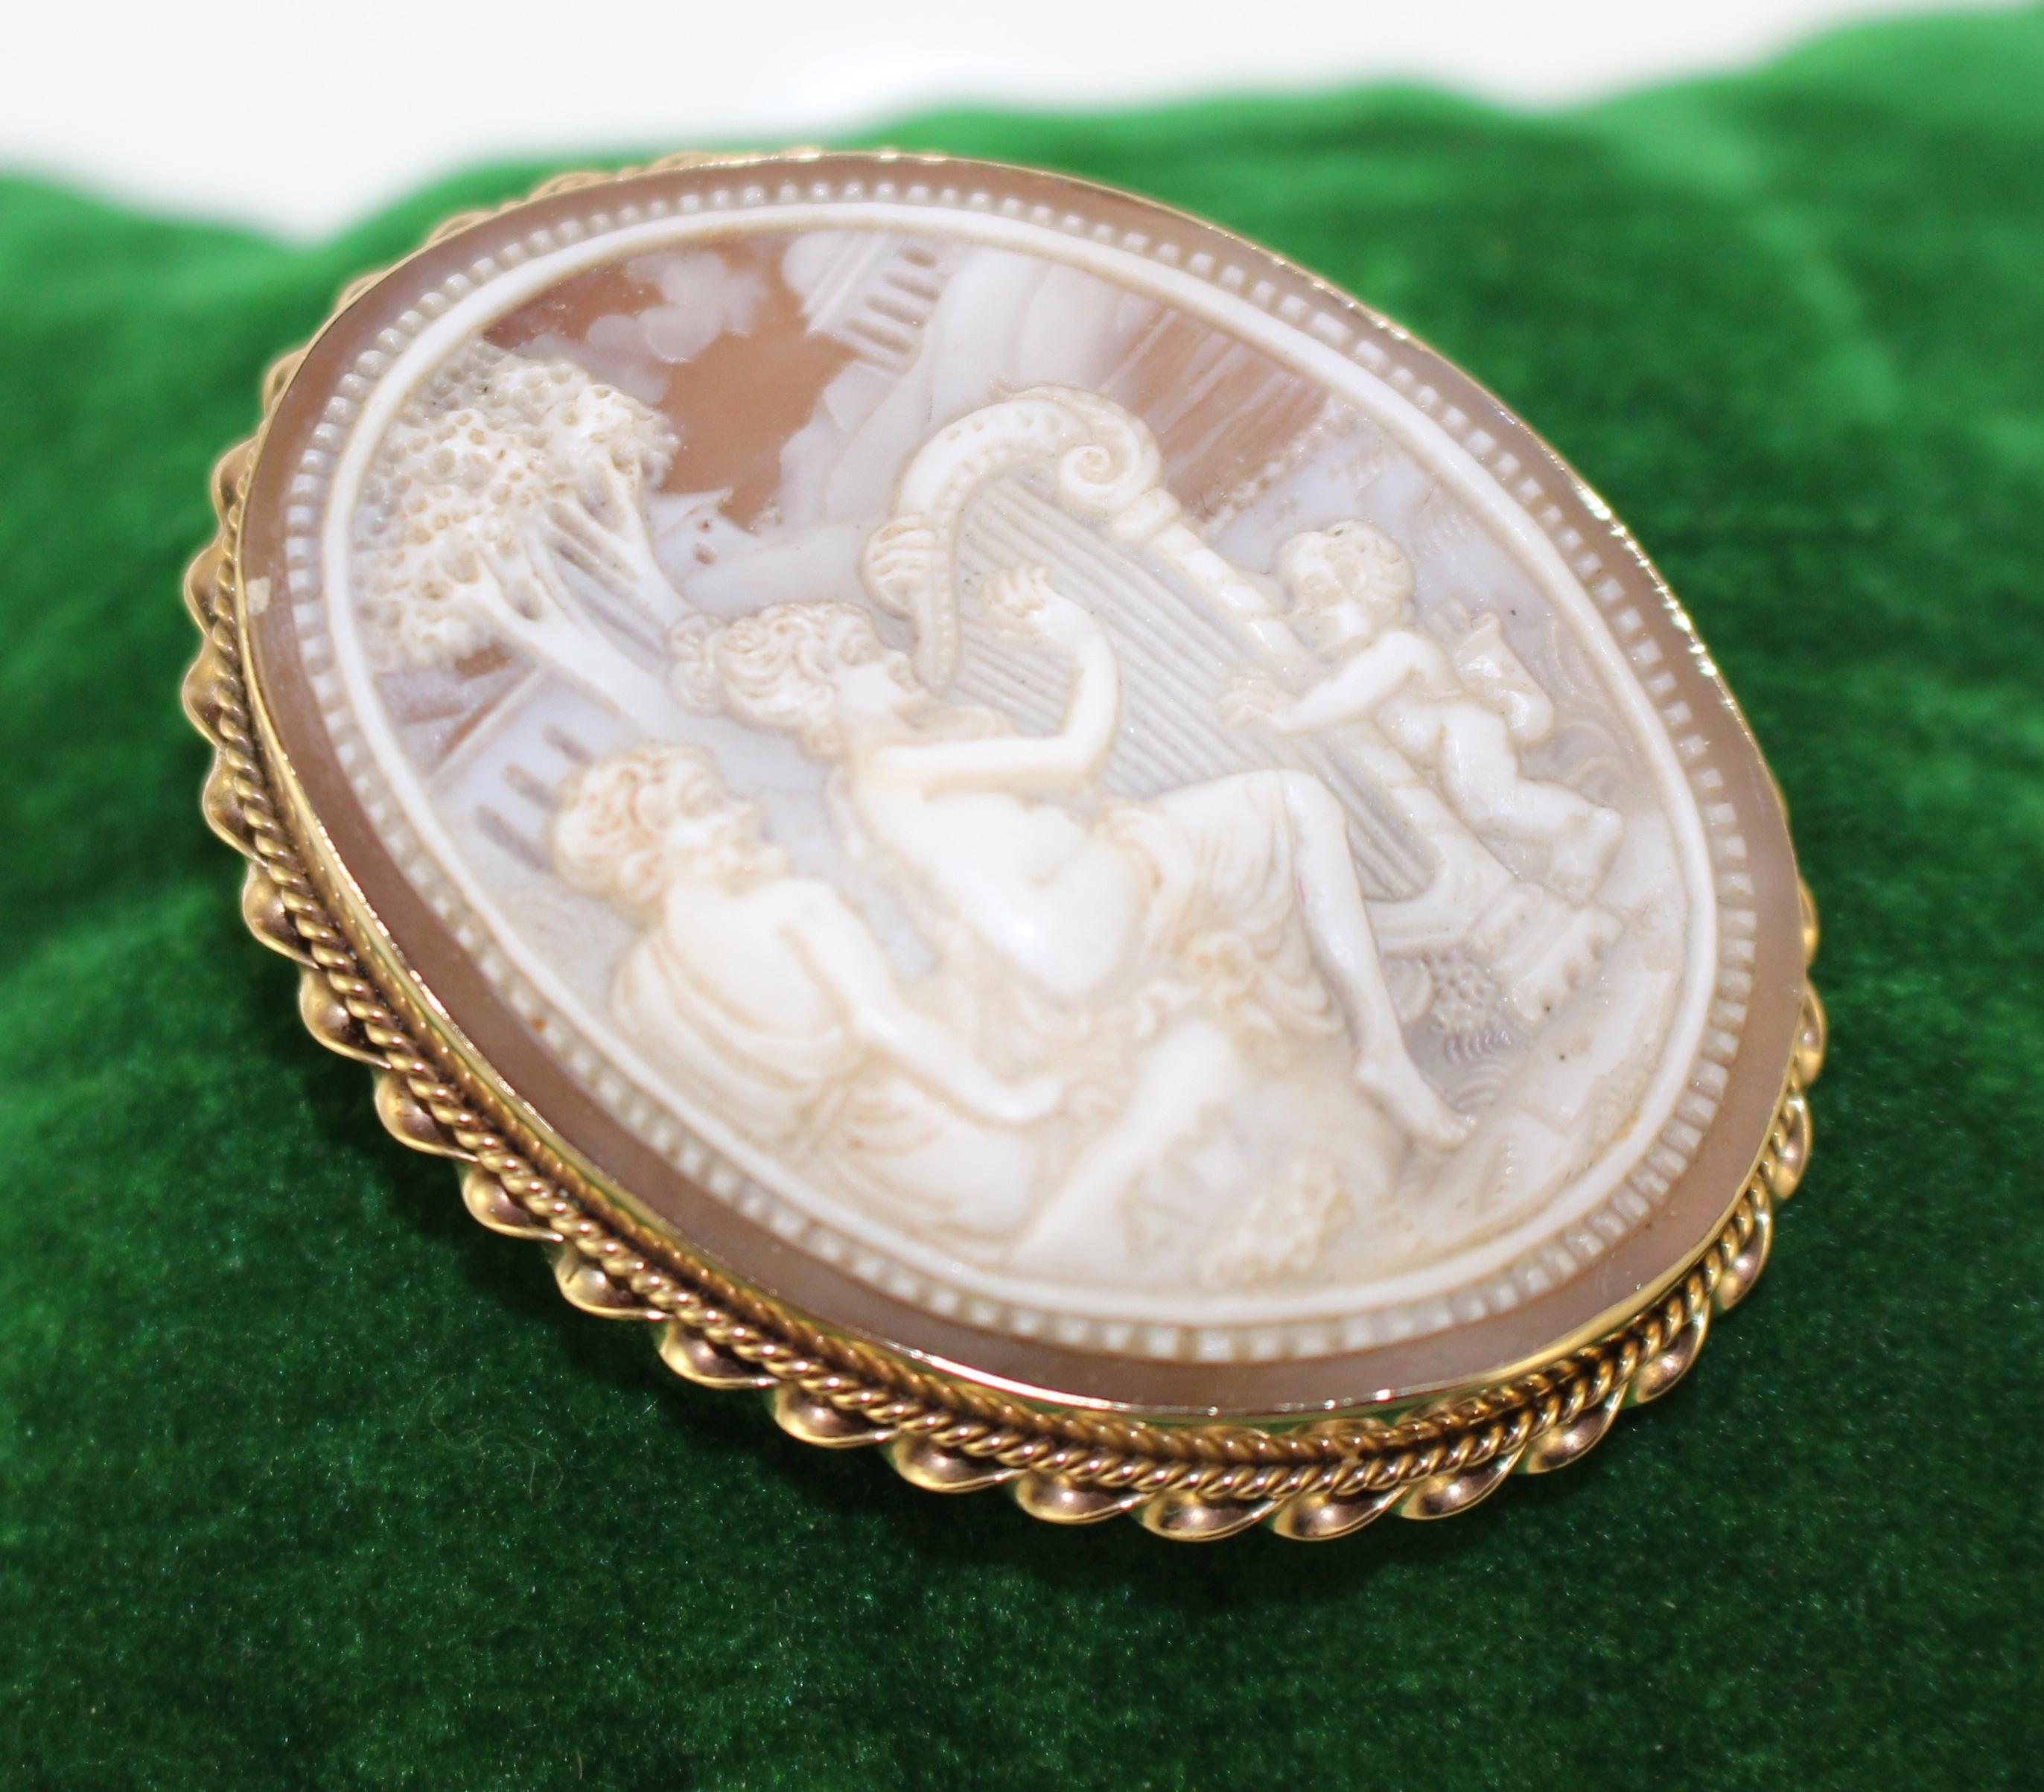 Gold 9-carat gold, hallmarked Birmingham, 1986
Dimensions: 4 x 5.5 cm / 1 1/2 x 2 in
Total weight 13.1 g
Condition: Very good commensurate with age.




Offered for sale a good looking cameo brooch

Carved cameo shell depicting classical